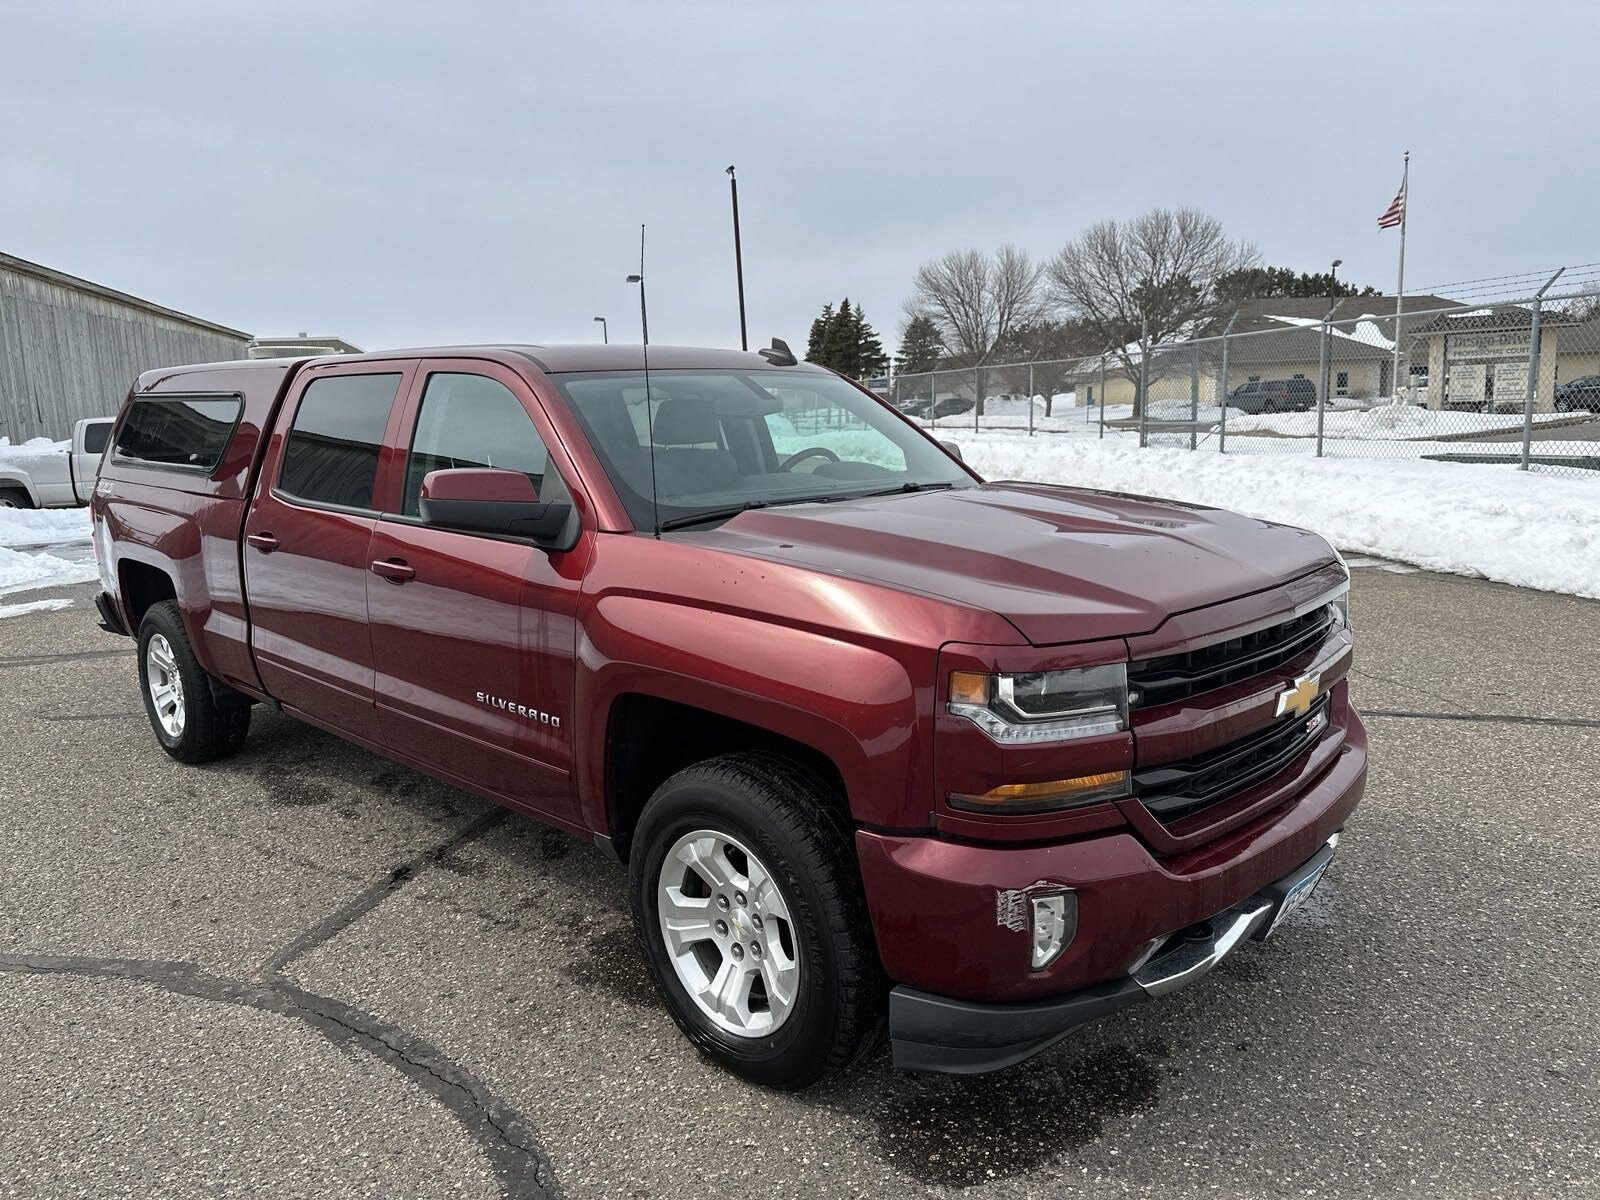 Used 2017 Chevrolet Silverado 1500 LT with VIN 3GCUKREC6HG359959 for sale in Baxter, Minnesota